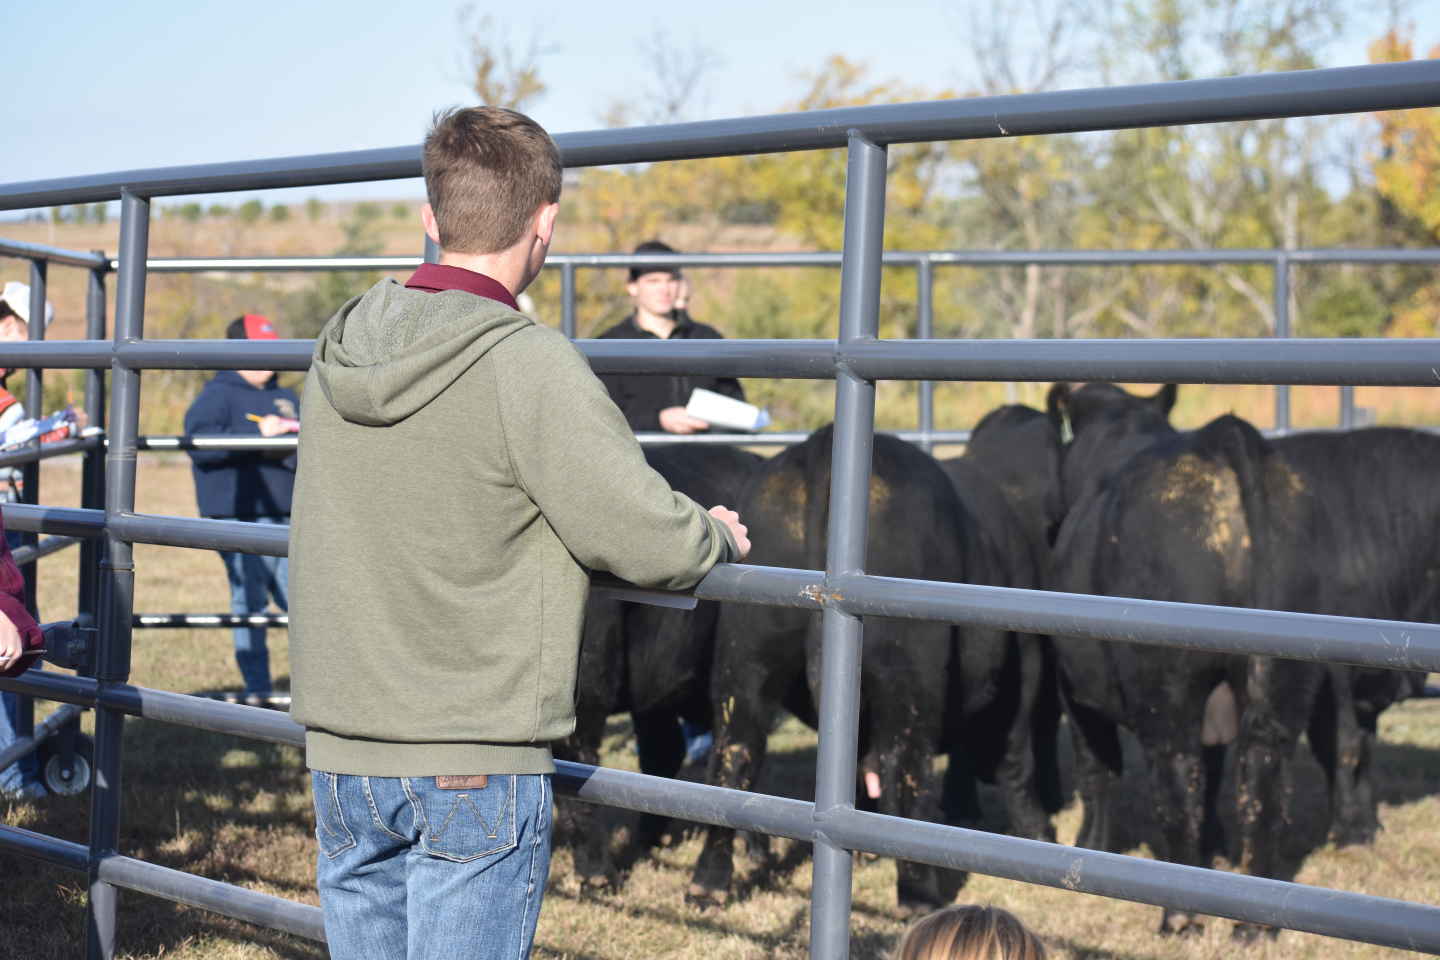 F.F.A. student watches cattle in pen